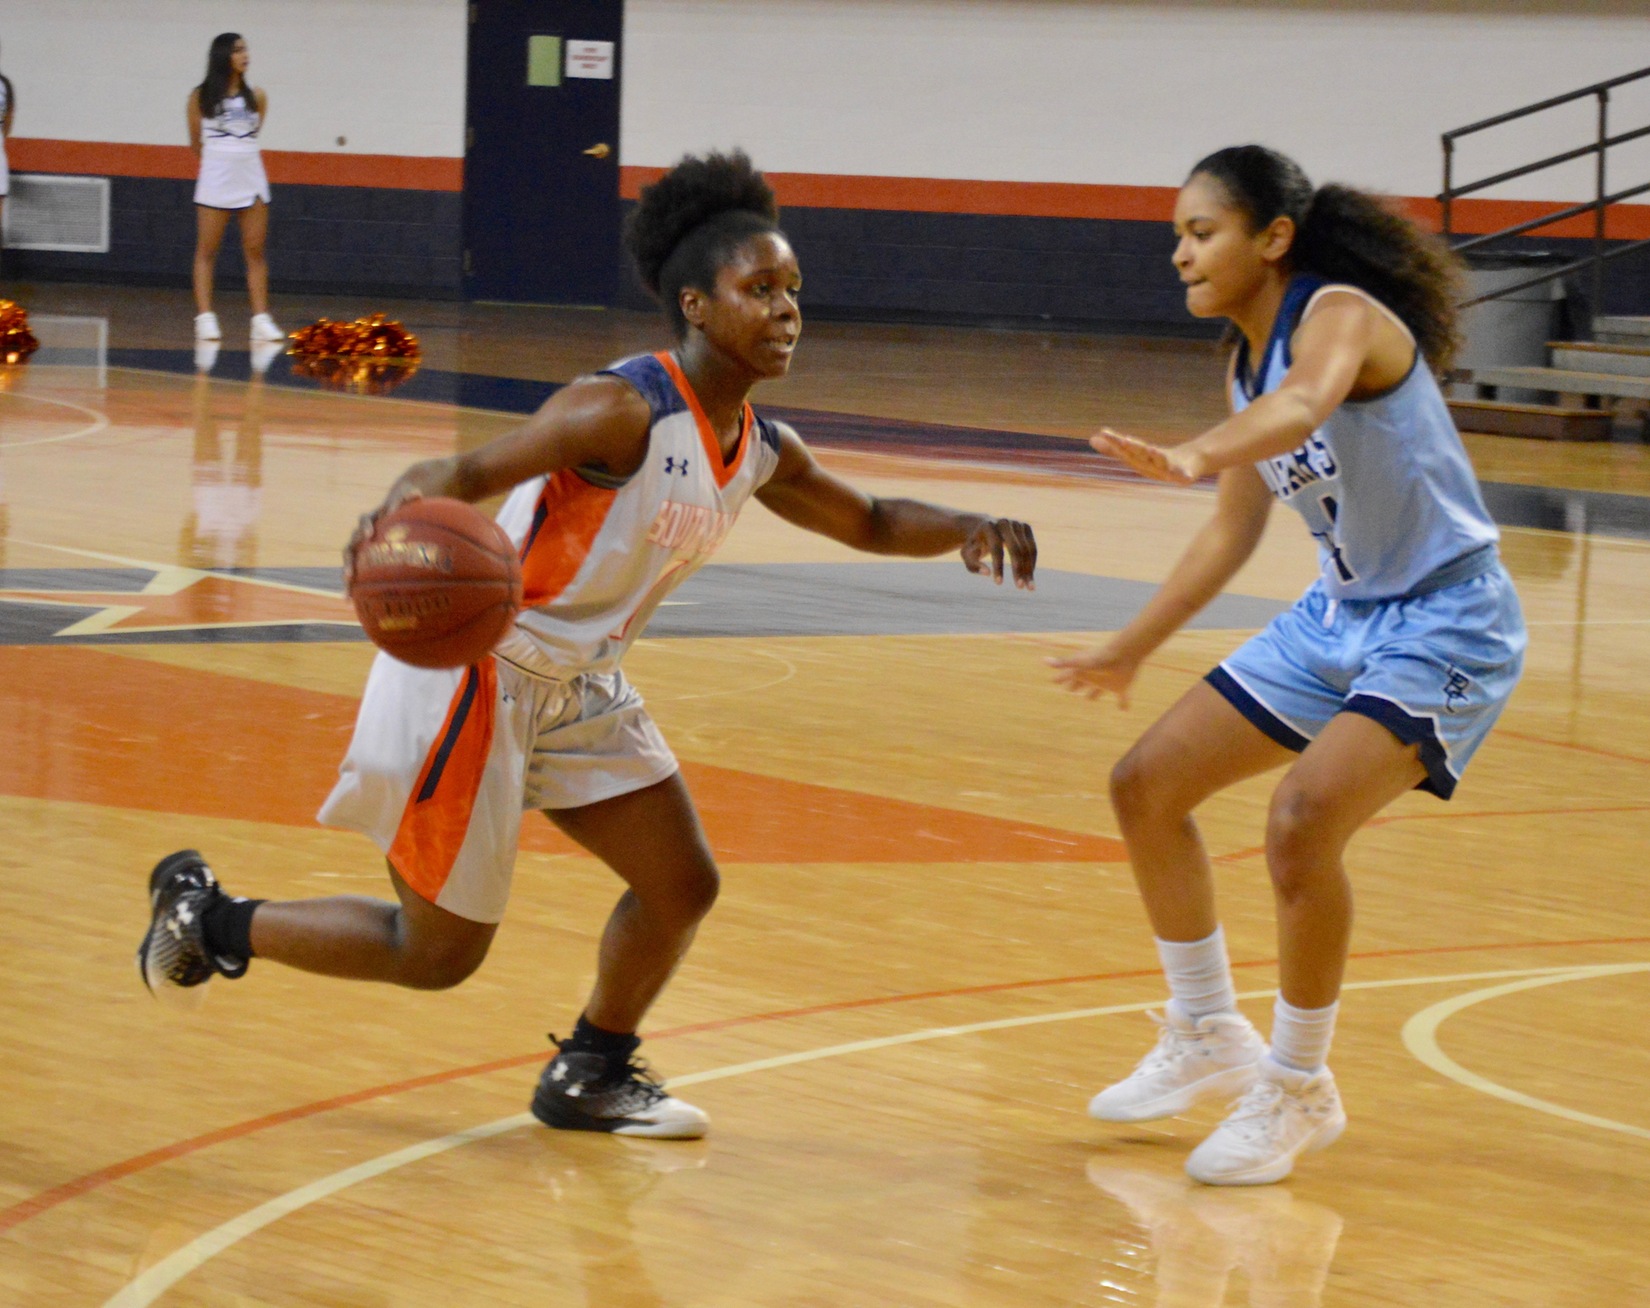 Lady Texans win third straight, down Coastal Bend 70-60 Wednesday night at the Texan Dome